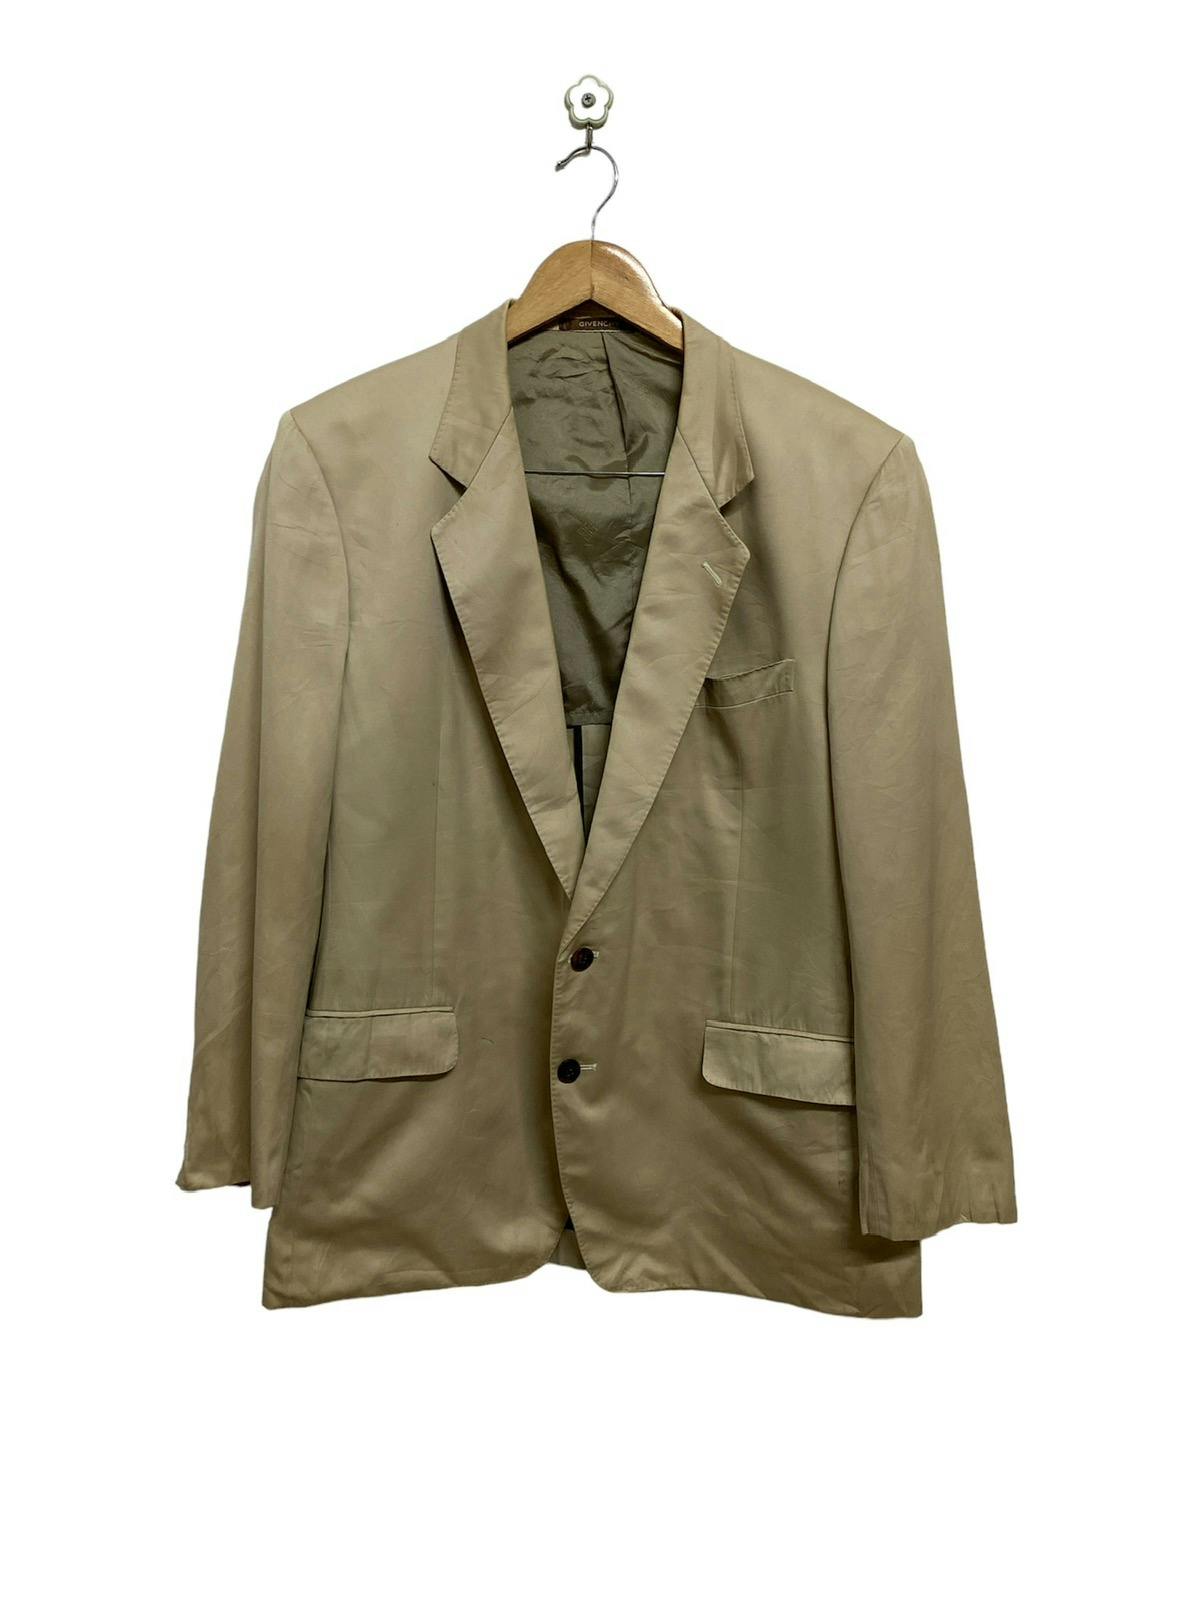 Givenchy Relaxed Jacket Blazer Suit - 1